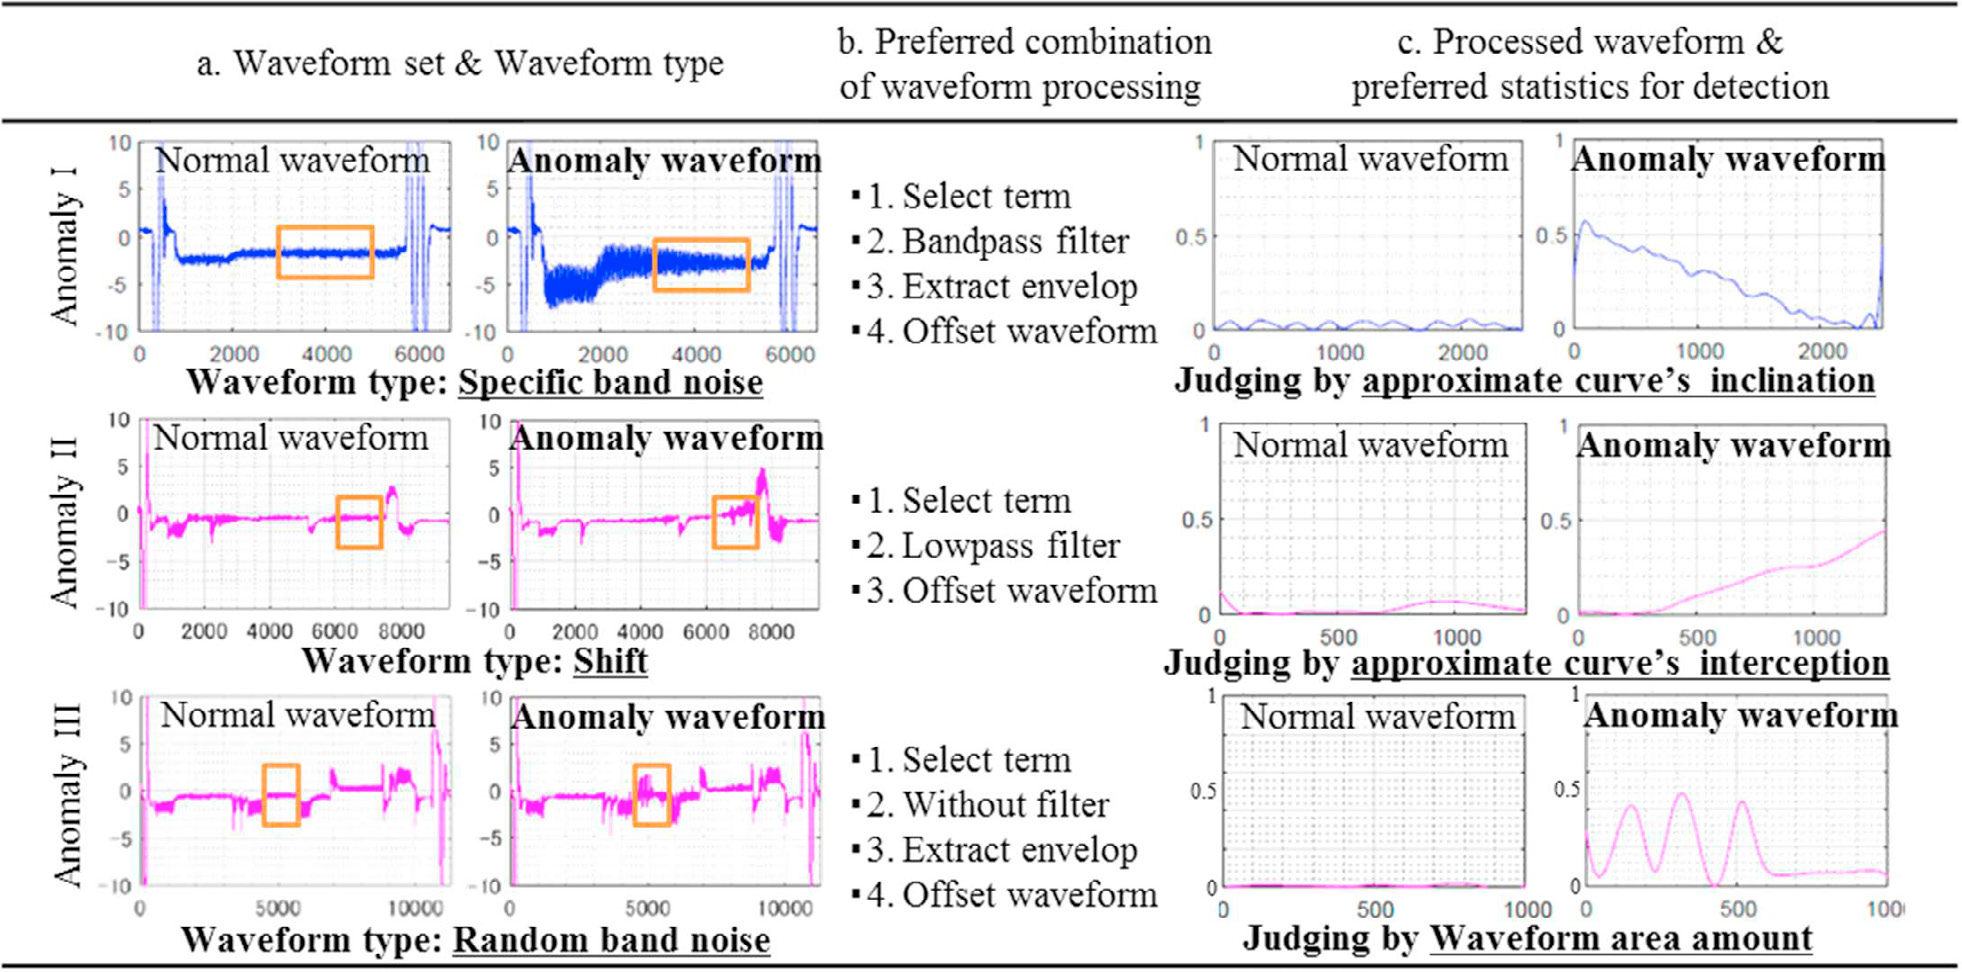 Table 1. Formalized waveform processing and statistics combination for anomaly detection